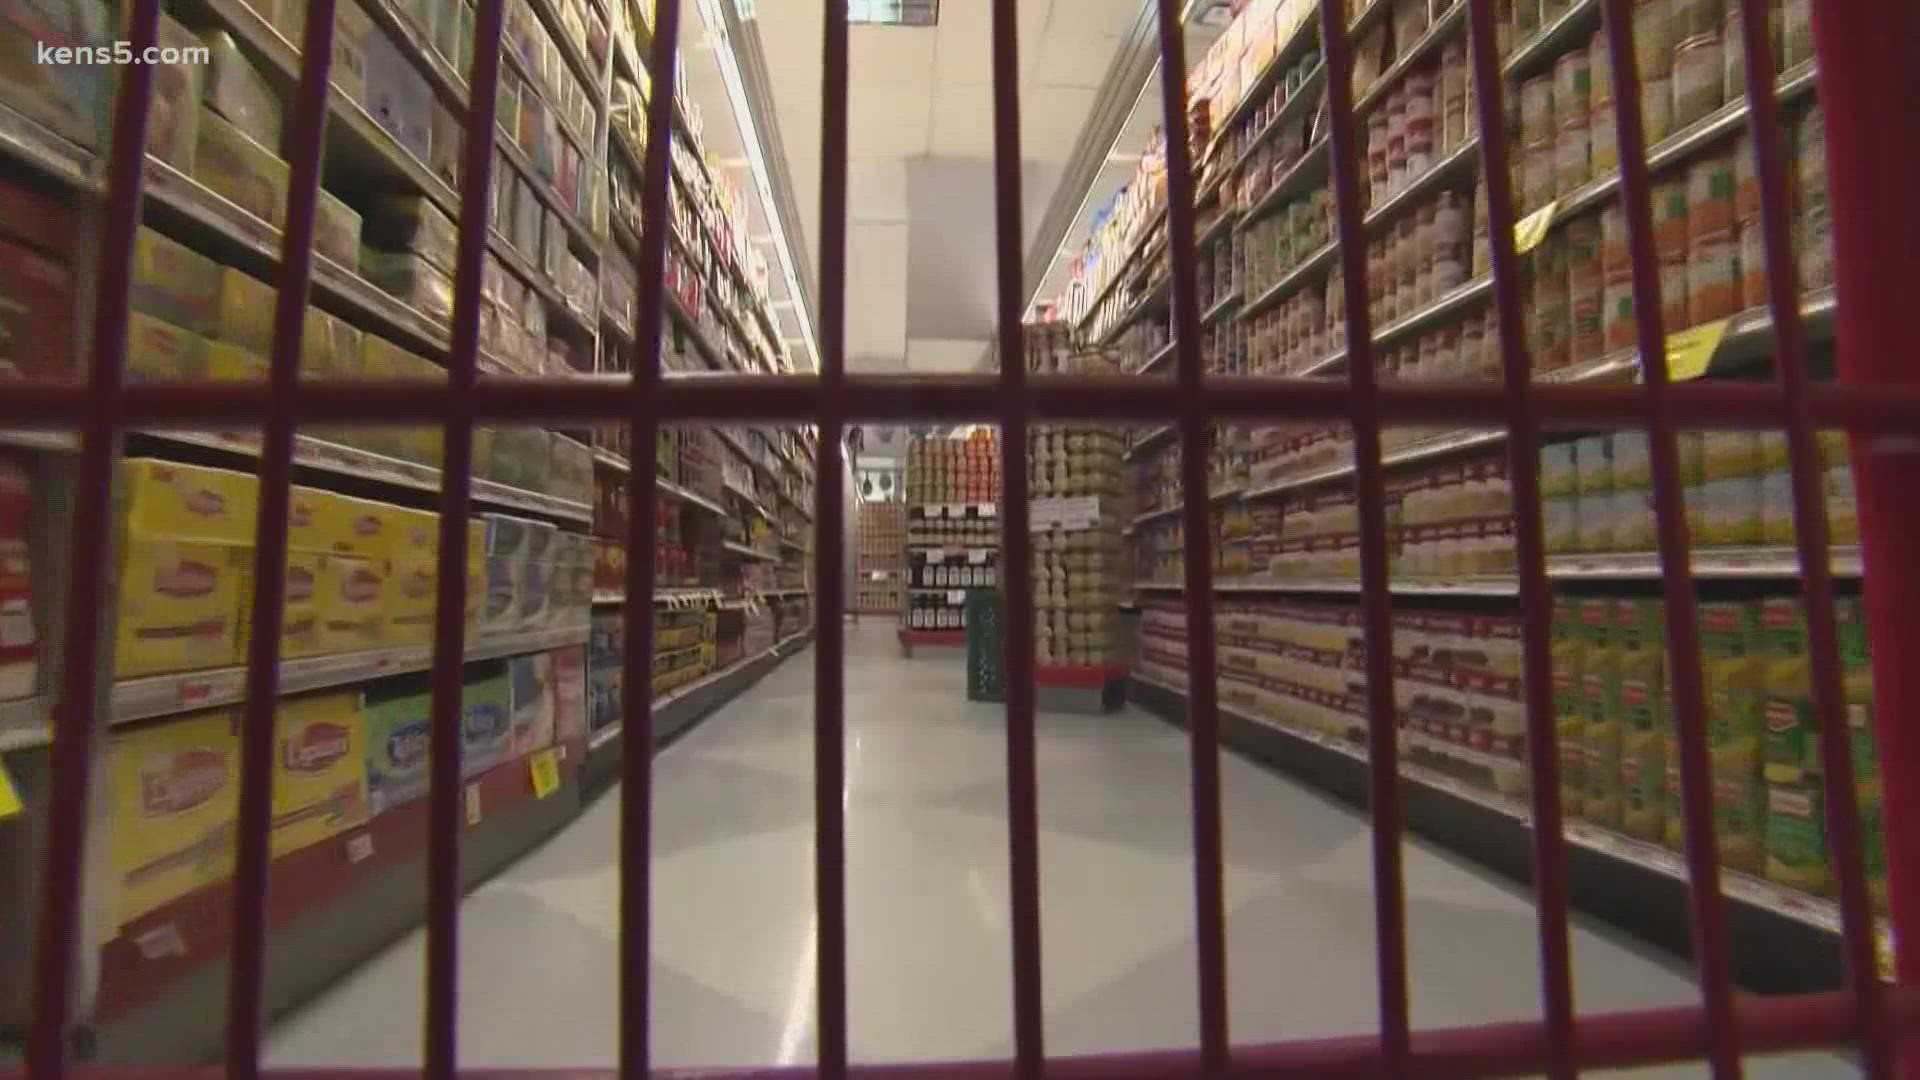 H-E-B says they are 'in good shape' despite difficult circumstances.